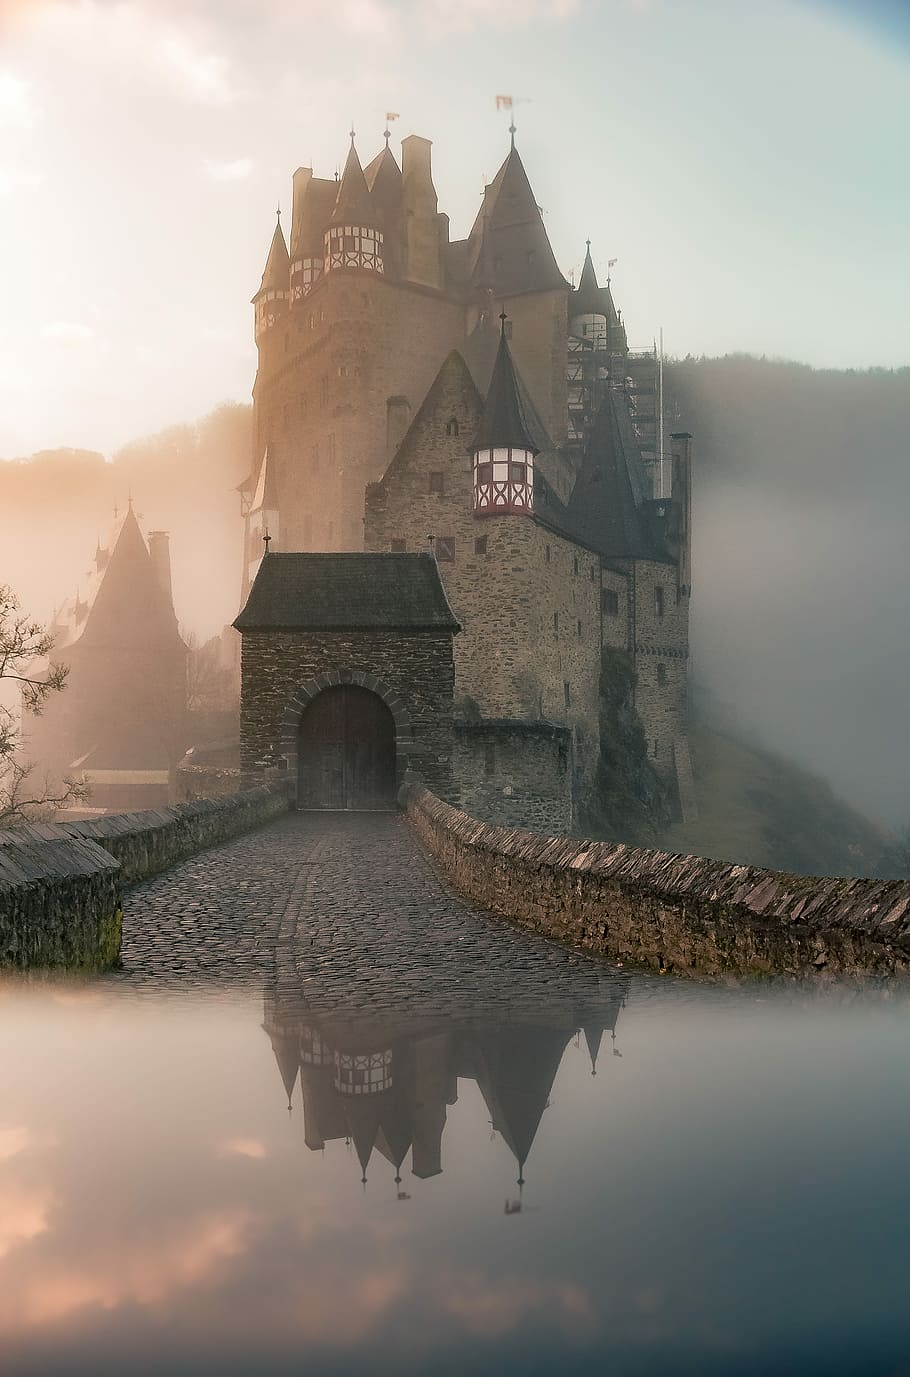 reflection of a castle surrounded with fogs, grey concrete castle